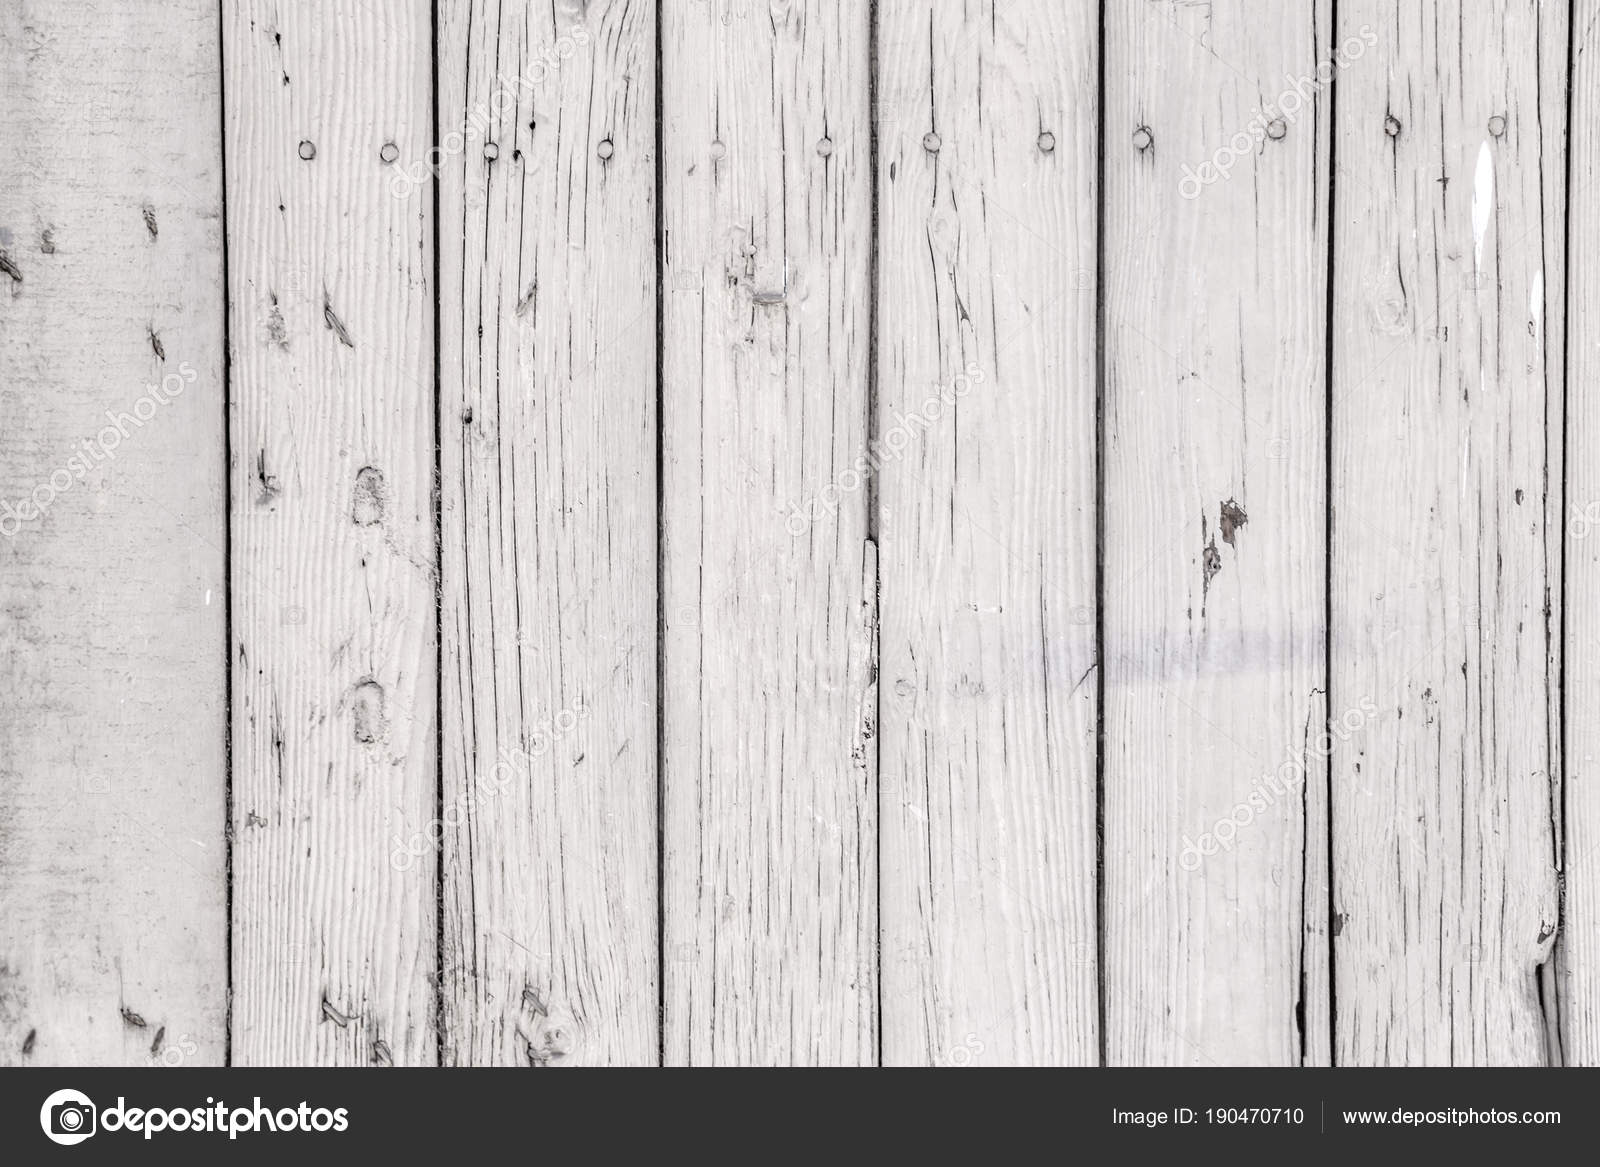 Rough Wooden Panel Texture Background Stock Photo Image By C Enginkorkmaz